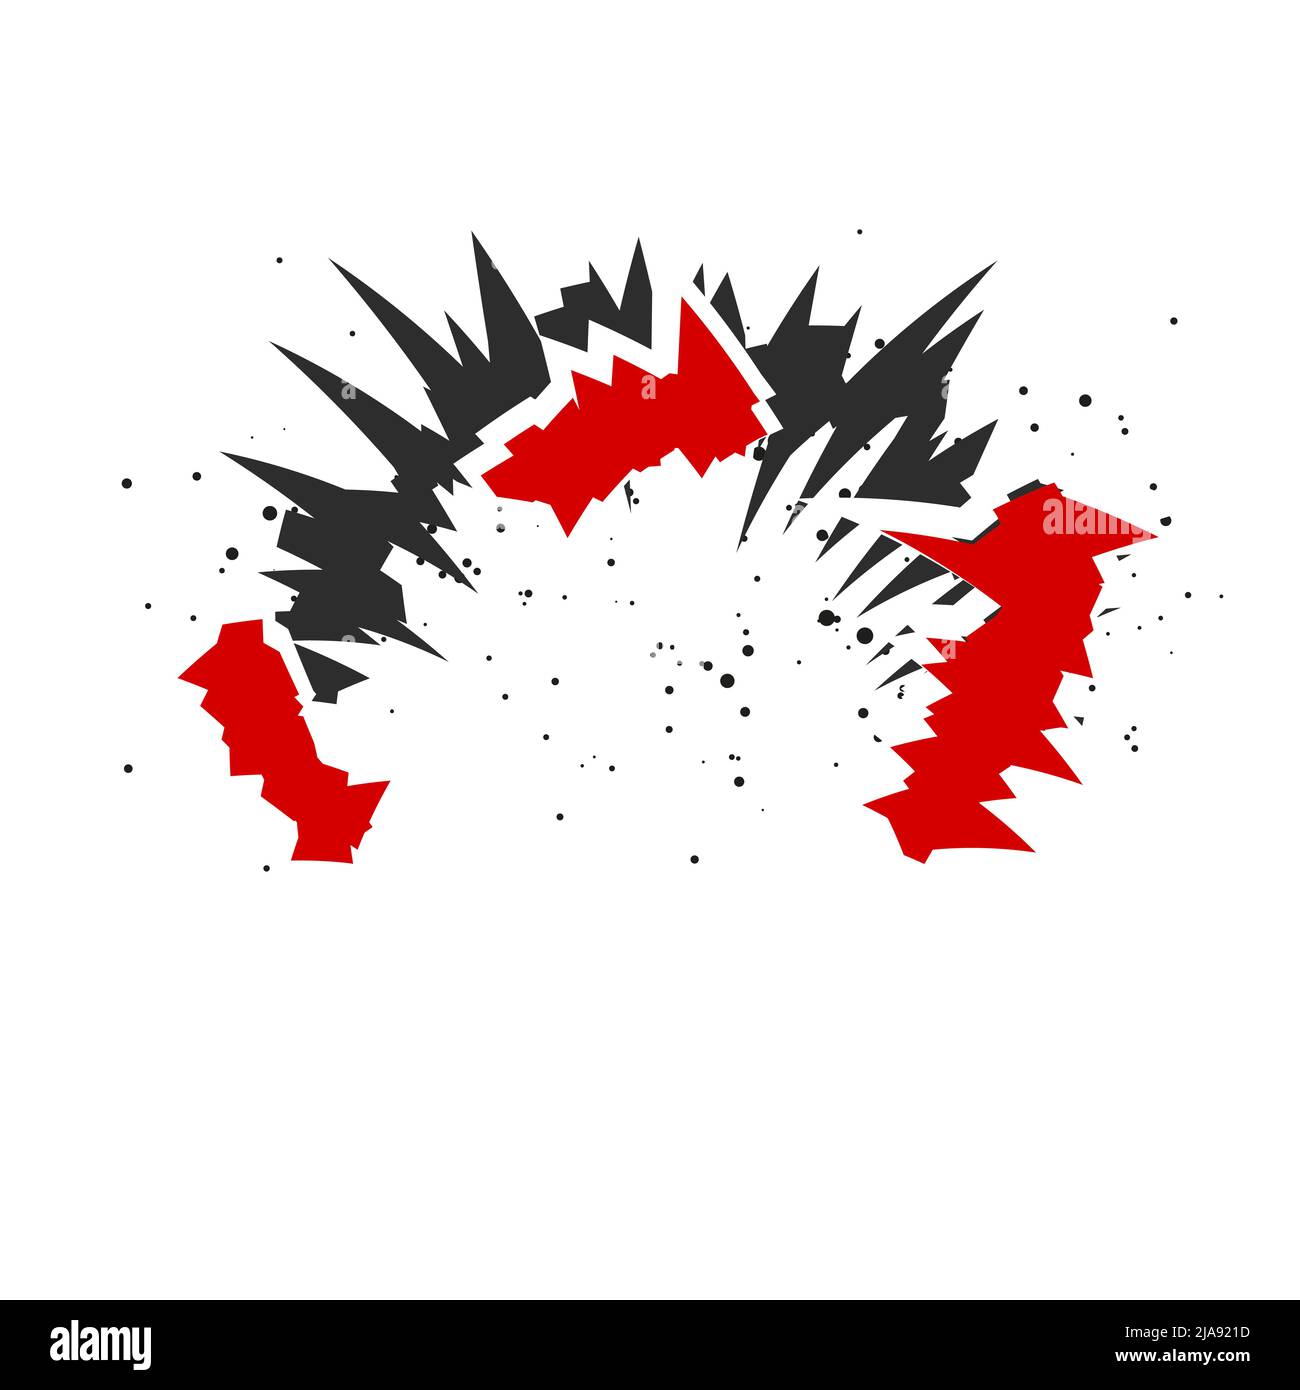 Cartoon explosion with flying particles effect. Radial explosion silhouette. Flat illustration isolated on white background. Stock Photo